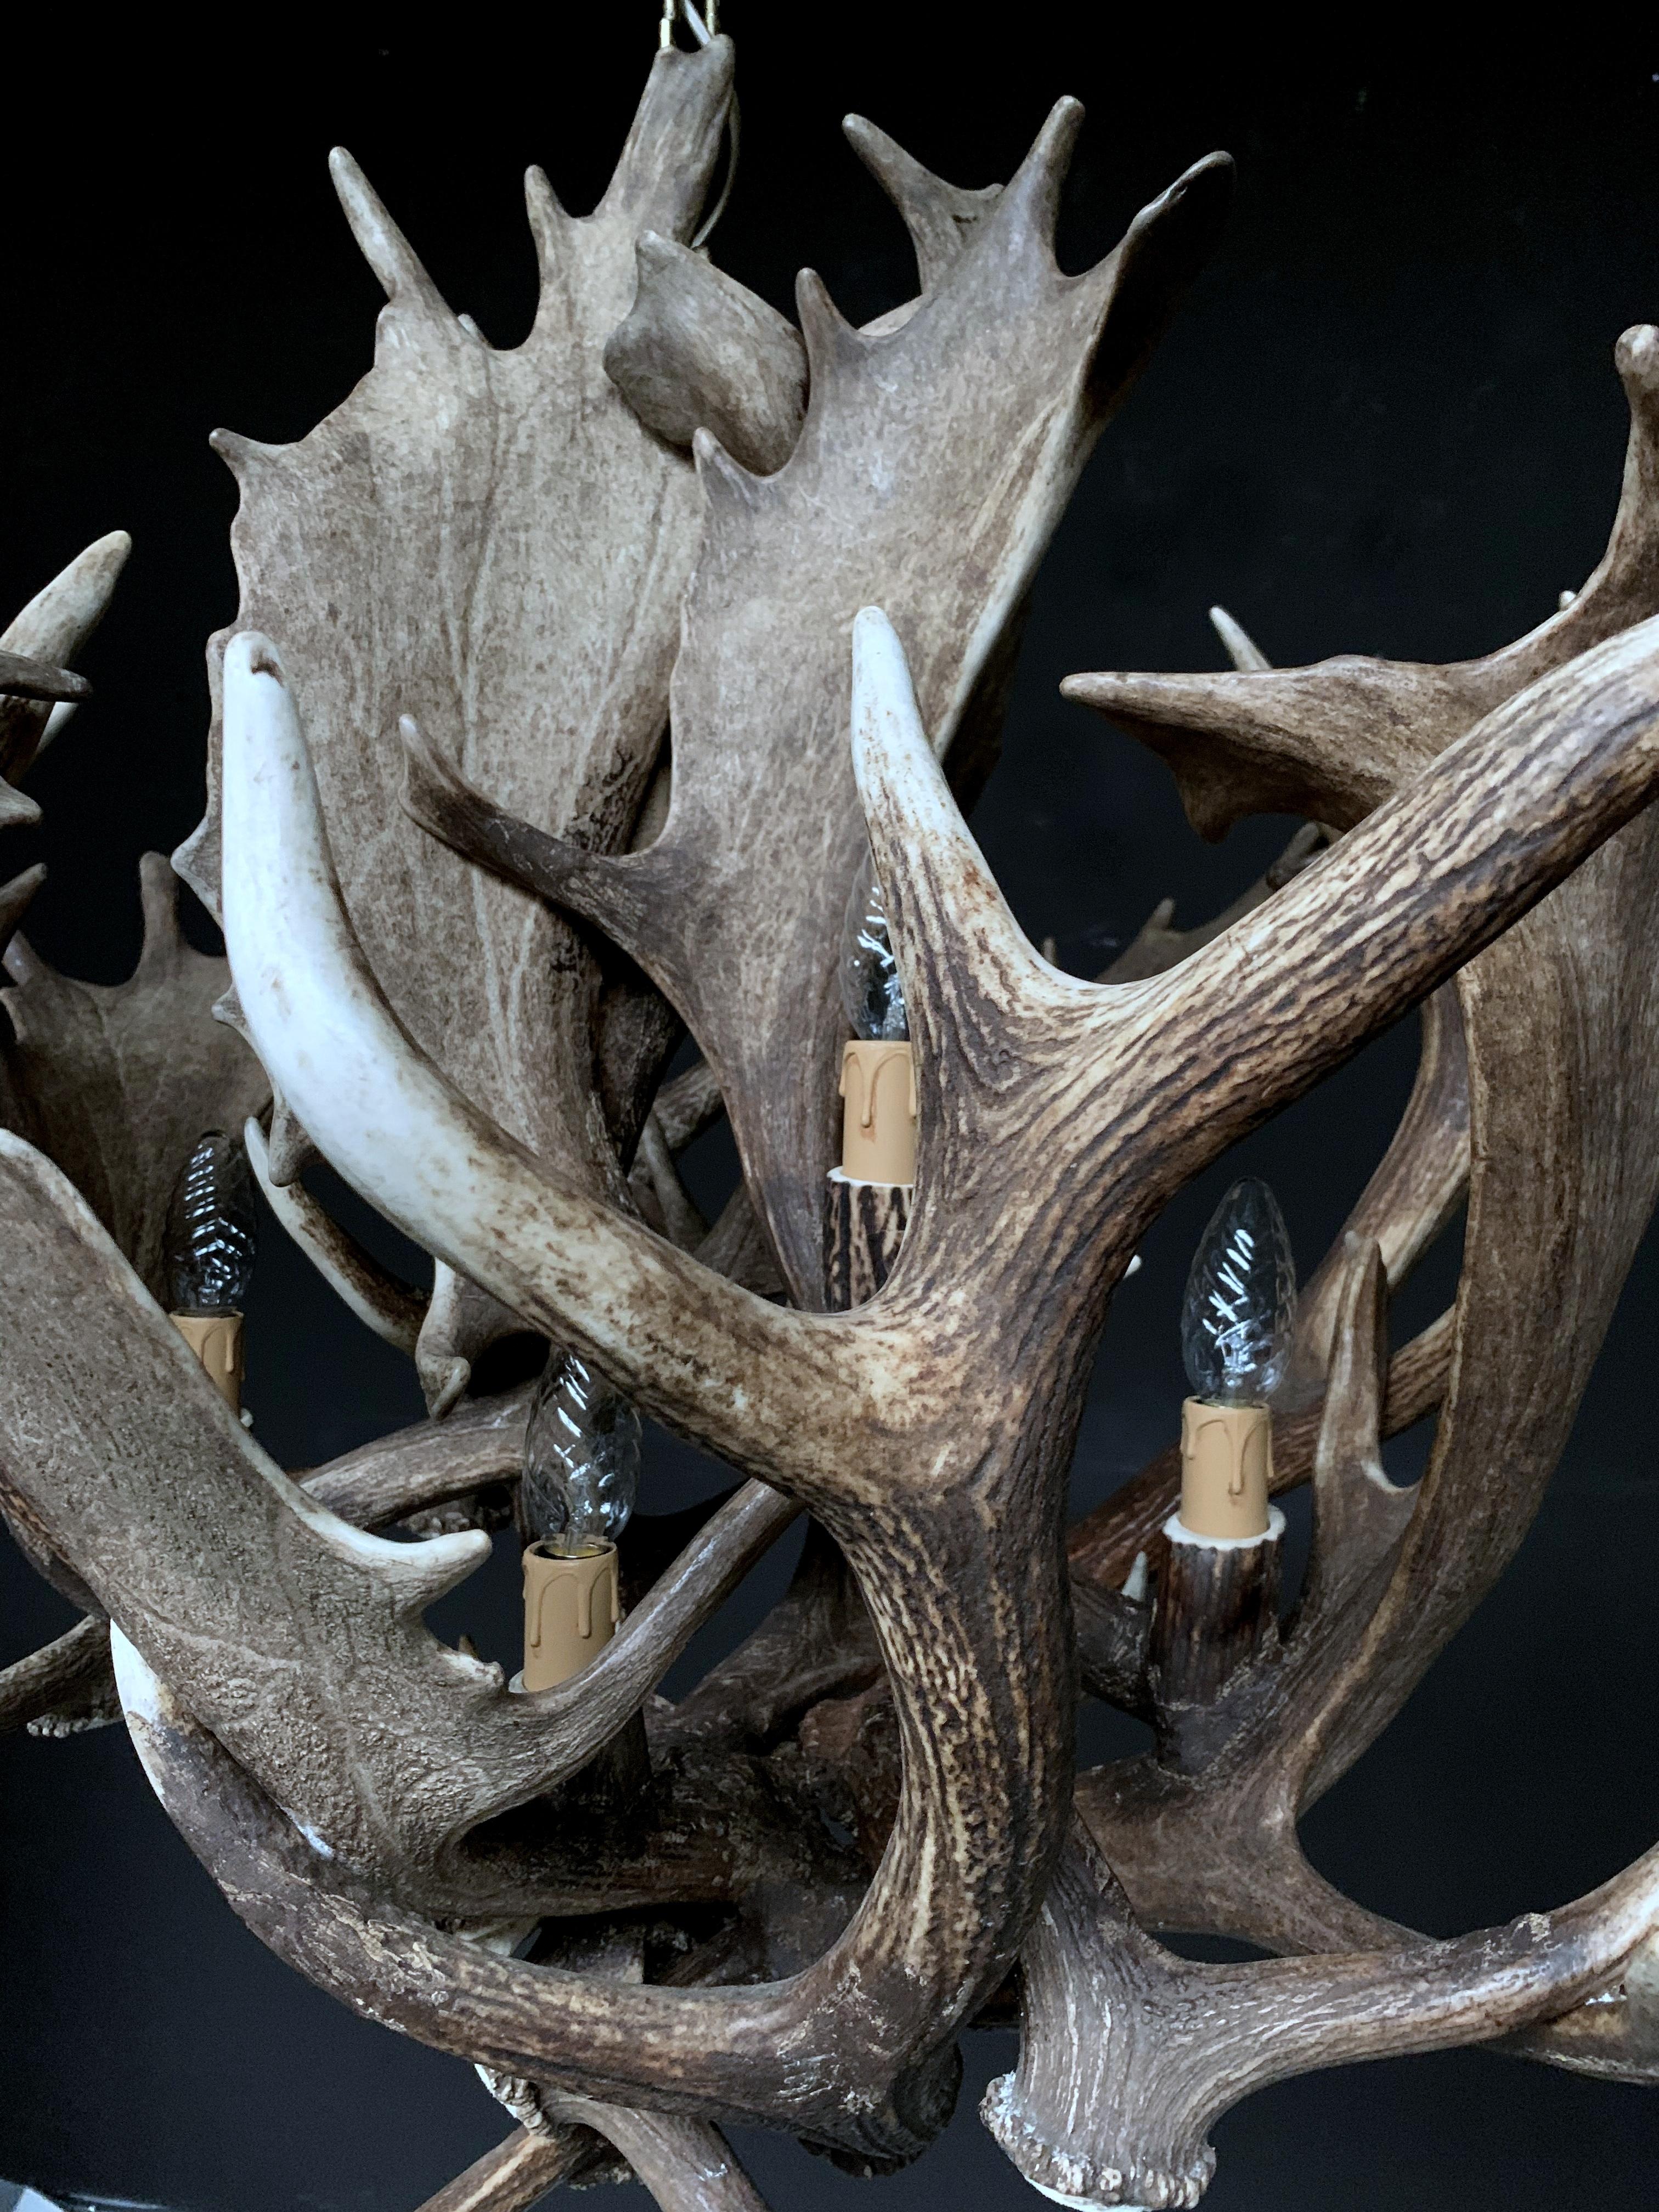 Modern chandelier made of antlers (HG 241). The chandelier is made of fallow deer antler. The electrical wiring is concealed in the antlers and the quality of our chandeliers is really high. We can make any antler chandelier entirely according to